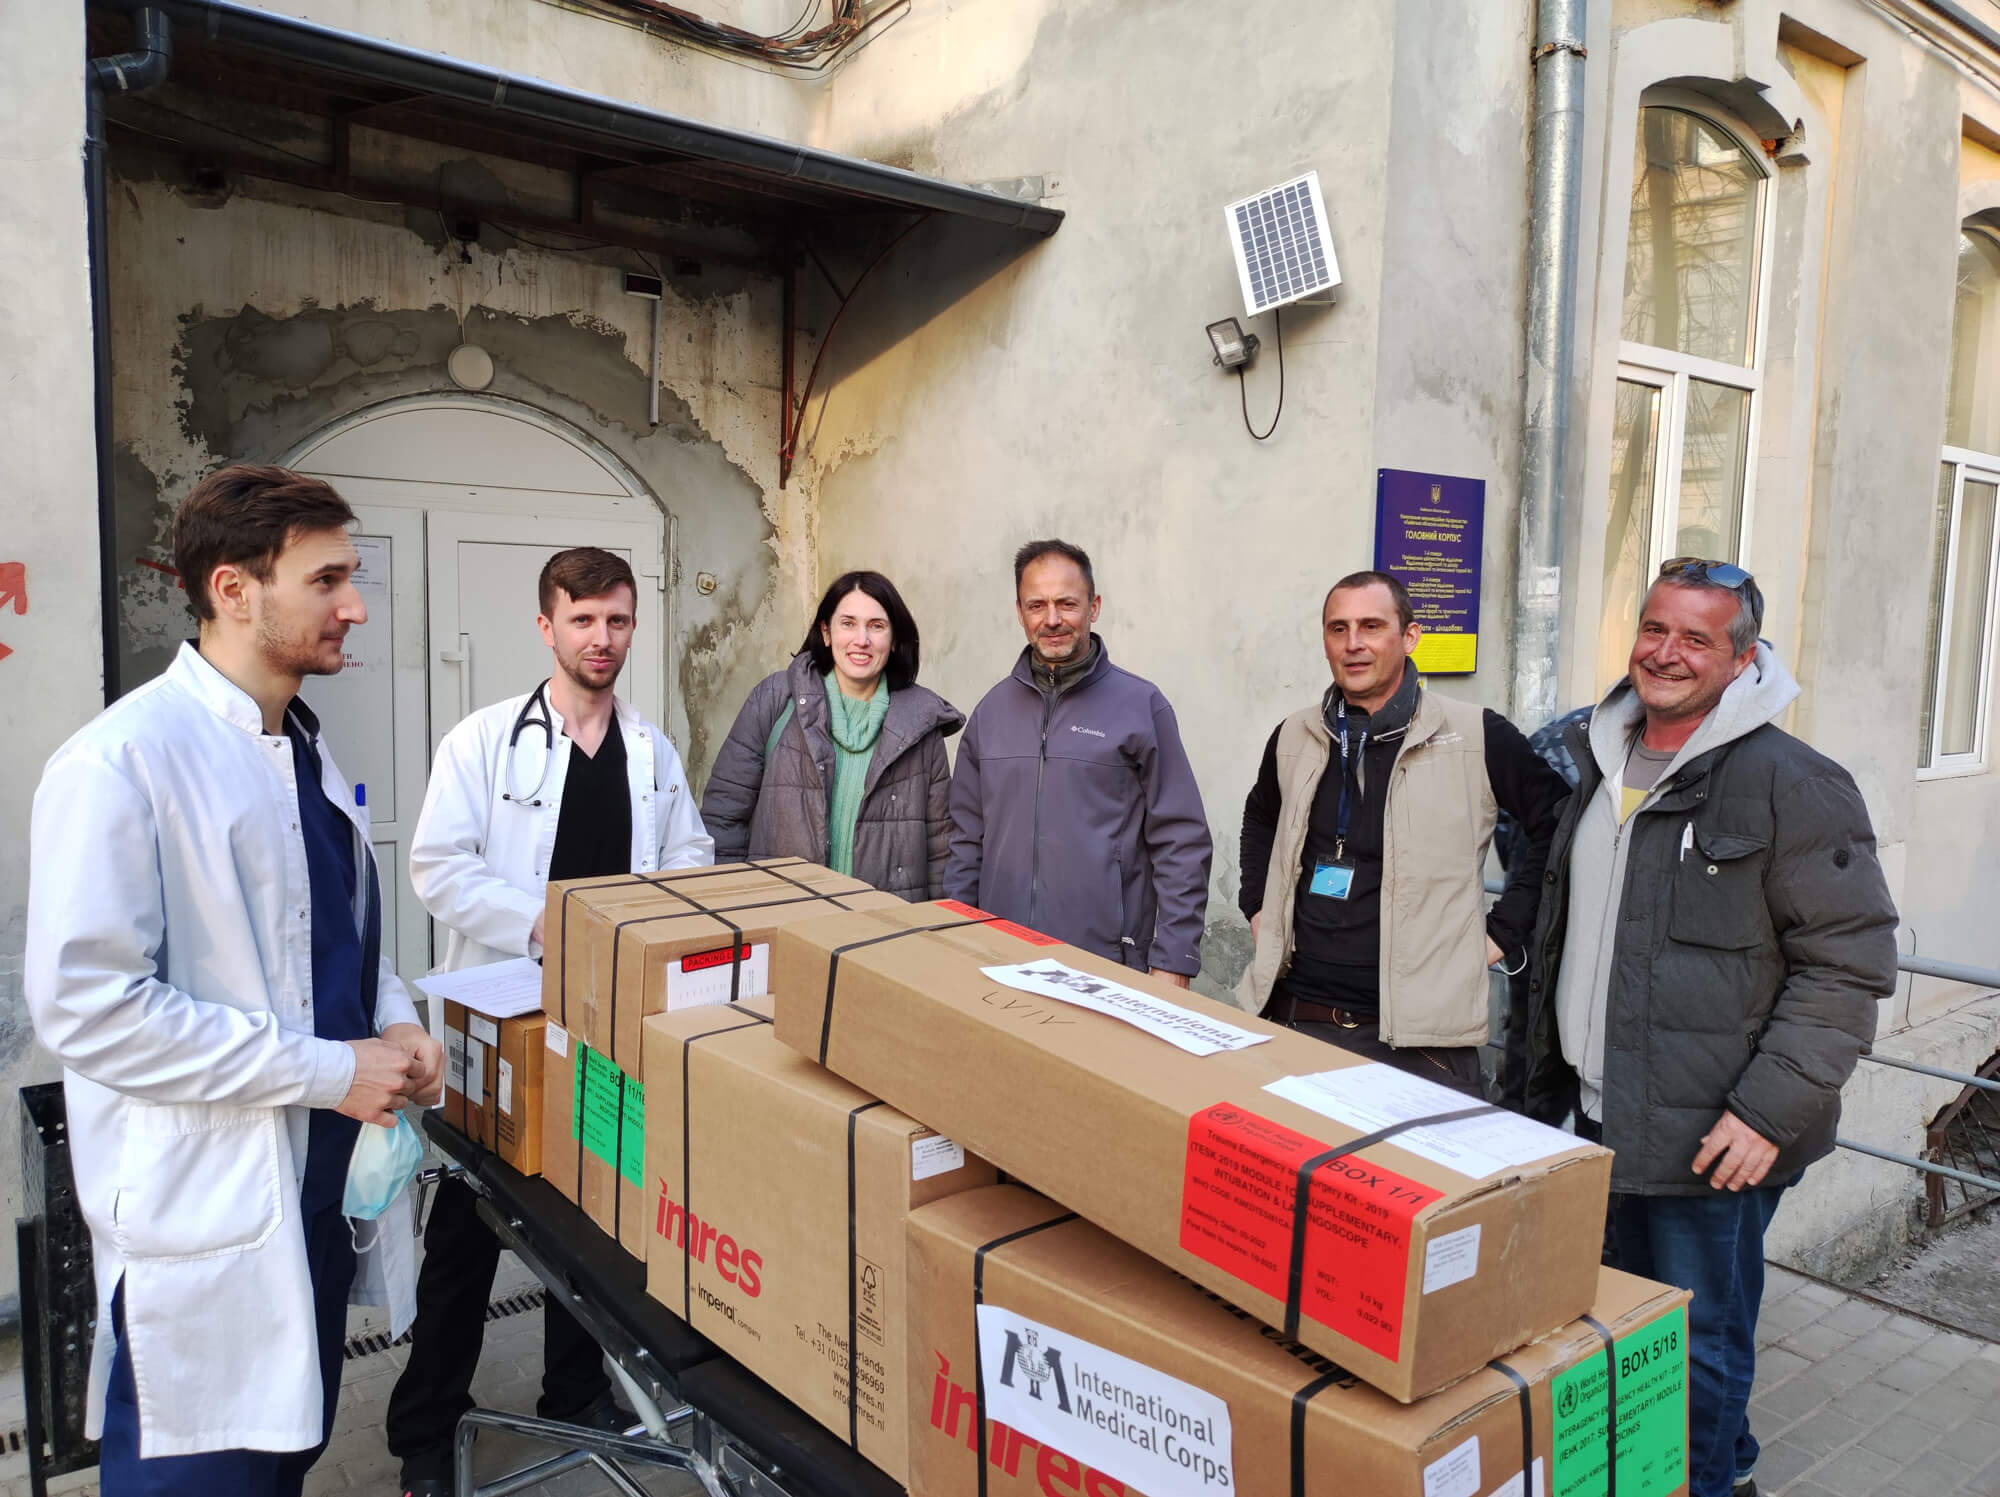 One of the first medical deliveries organized by International Medical Corps is delivered to the medical facility in Lviv in March 2022.